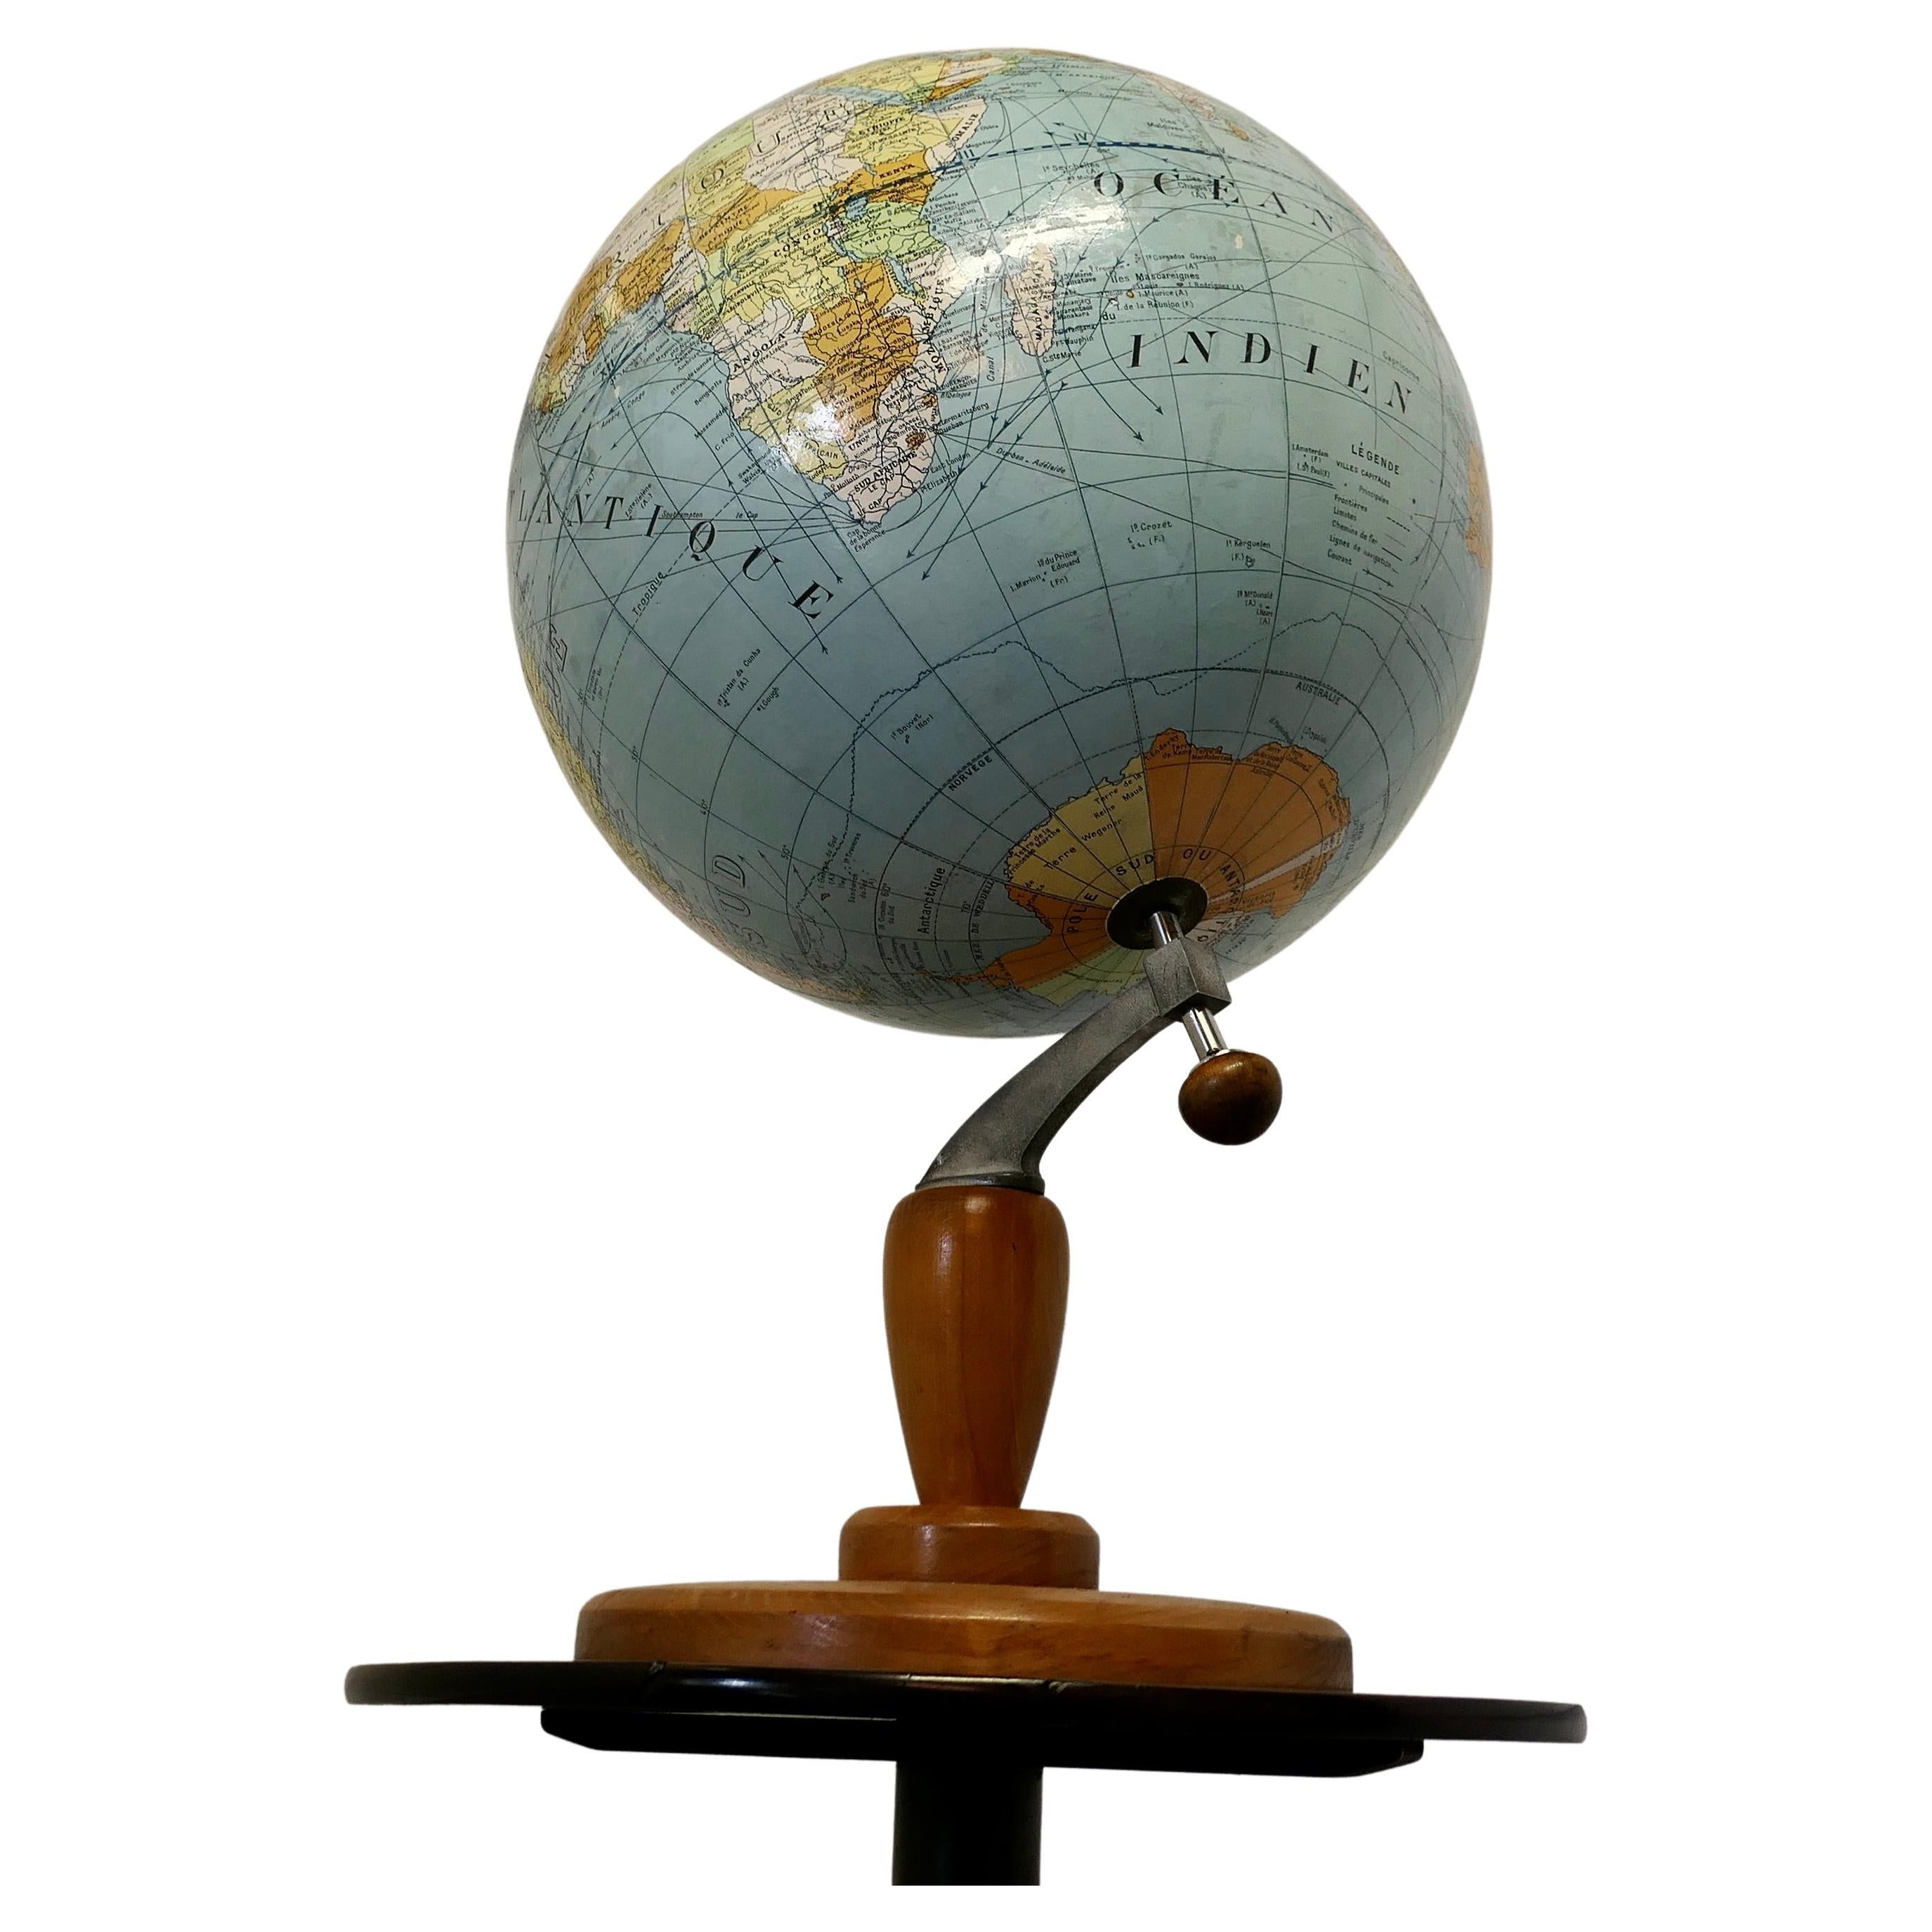 A large French terrestrial globe or world atlas by Girard et Barrère.


This is a very large stylish French terrestrial globe from the 1930s by Girard et Barrère it has territorial maps, oceanic currents and commercial routes.
This is a Papier